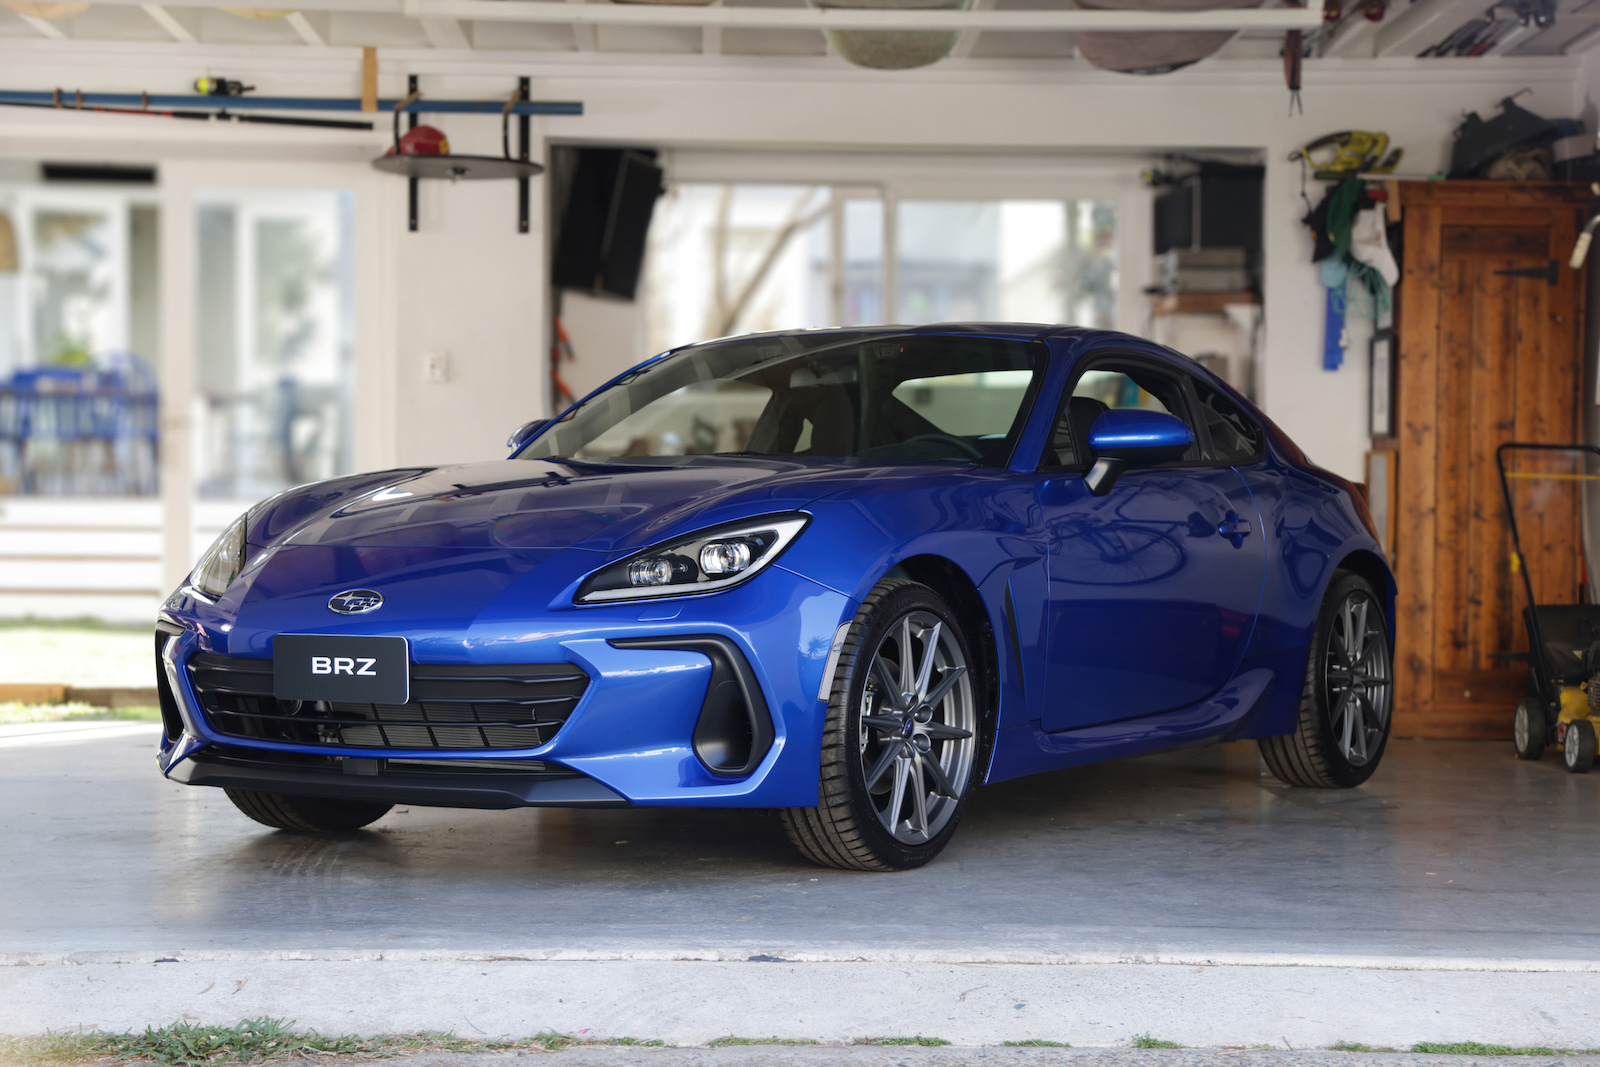 First batch of 2022 Subaru BRZ sports cars sold out in Australia